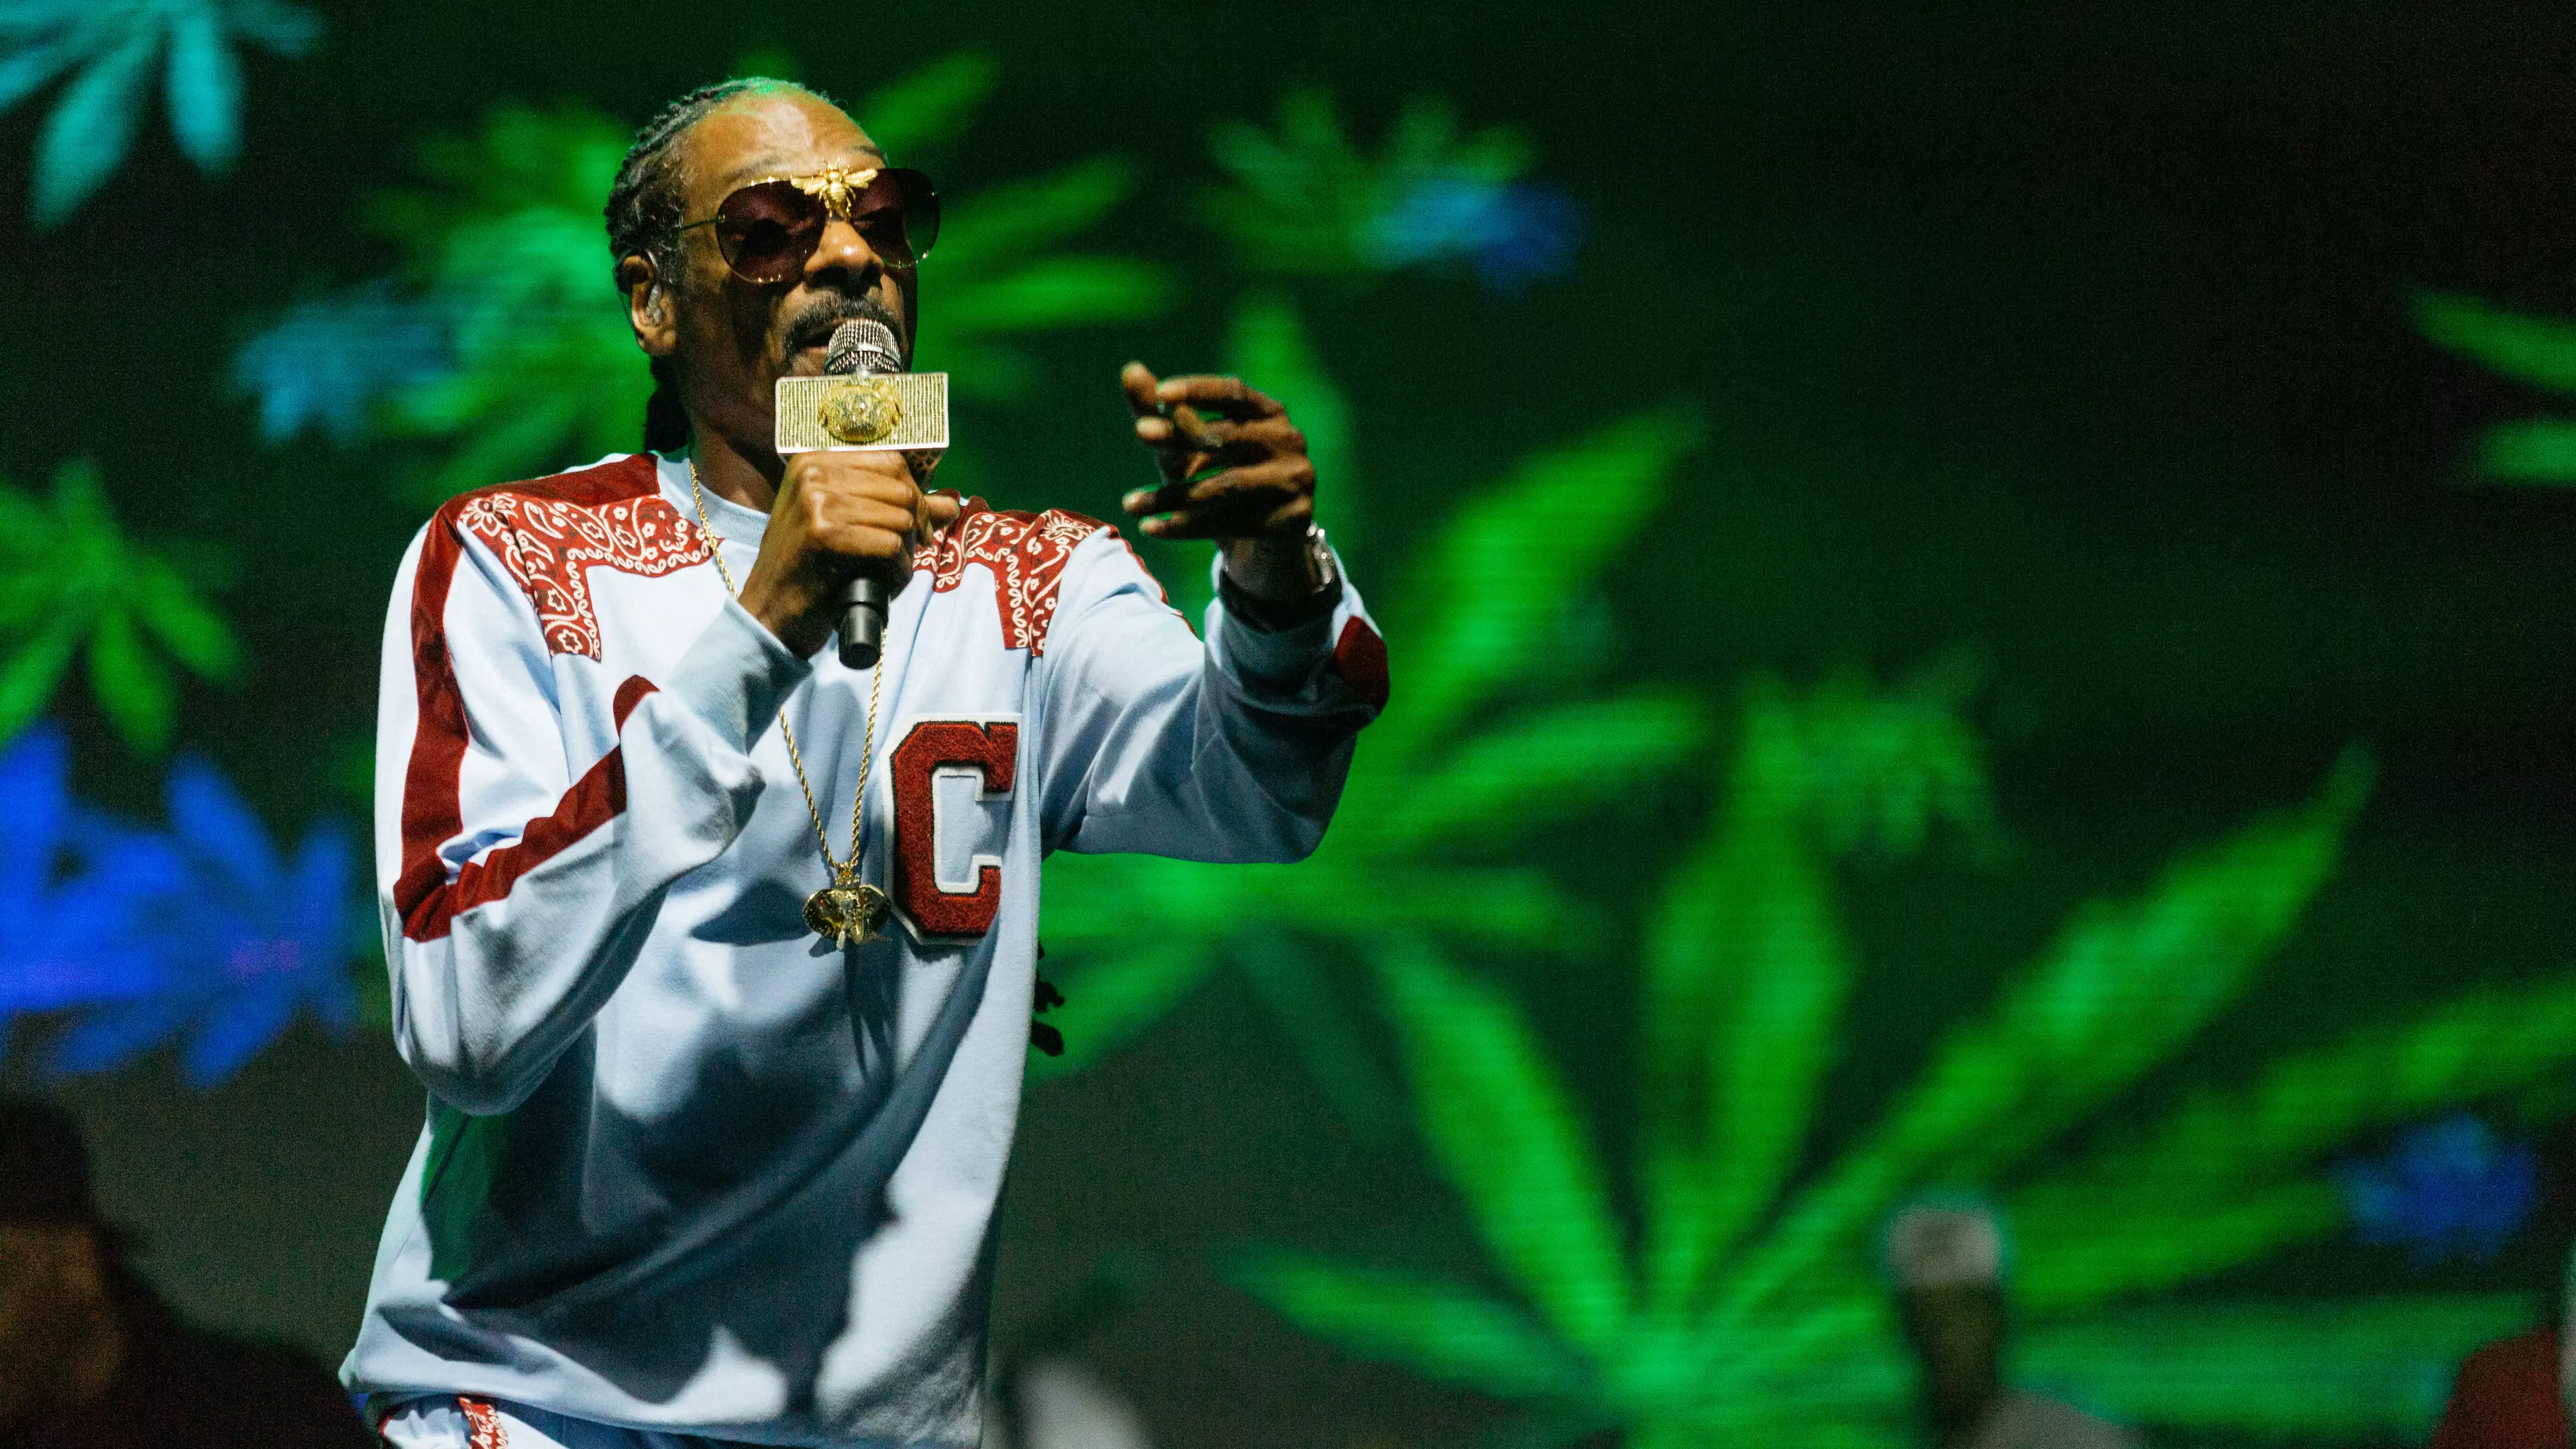 Snoop Dogg To Be Honoured With  A Star On The Hollywood Walk Of Fame